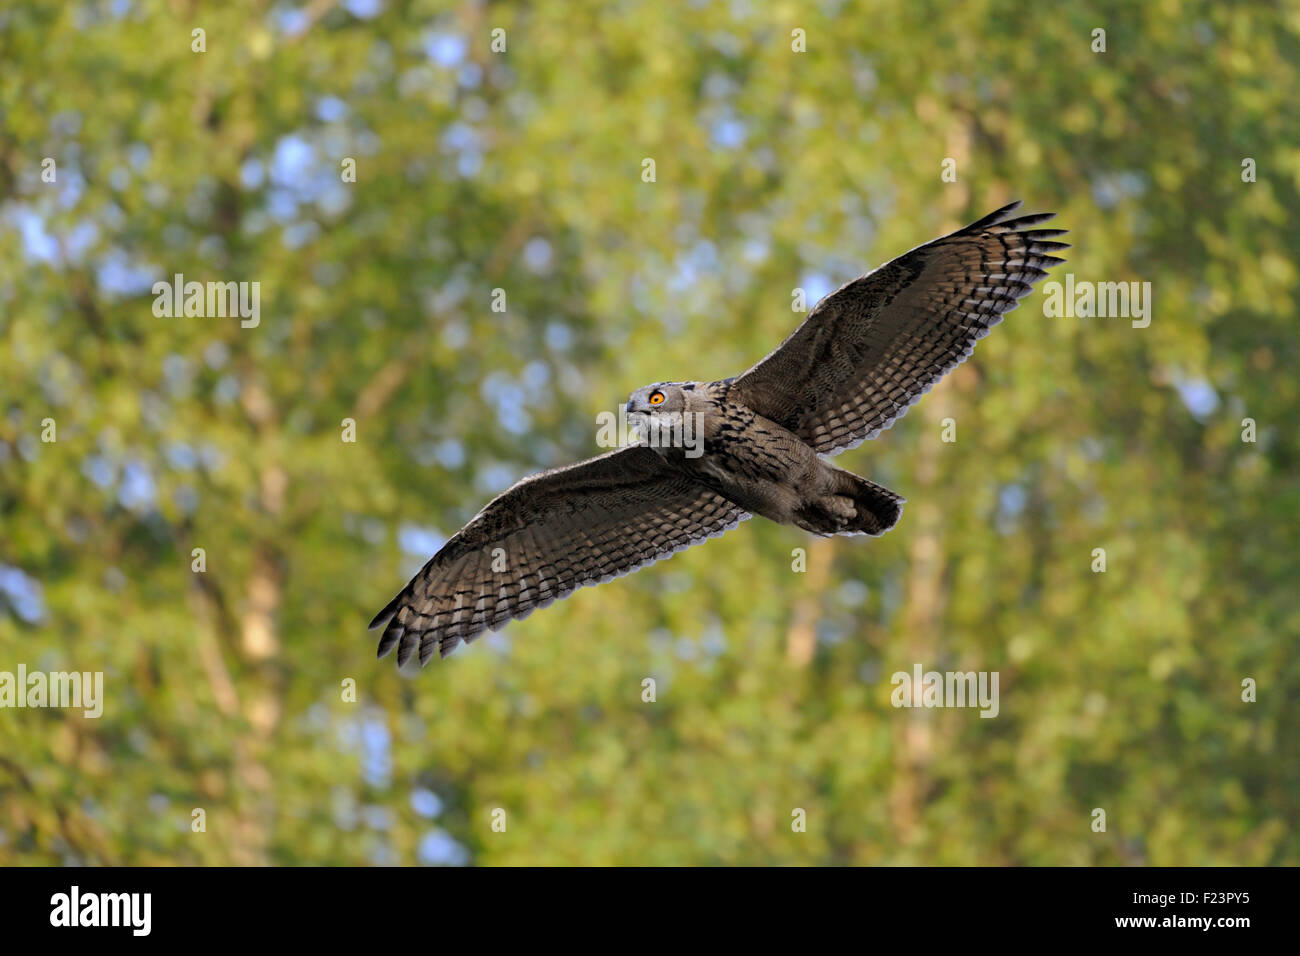 Wild majestic Northern Eagle Owl / Europaeischer Uhu ( Bubo bubo ) flies high above our heads. Stock Photo